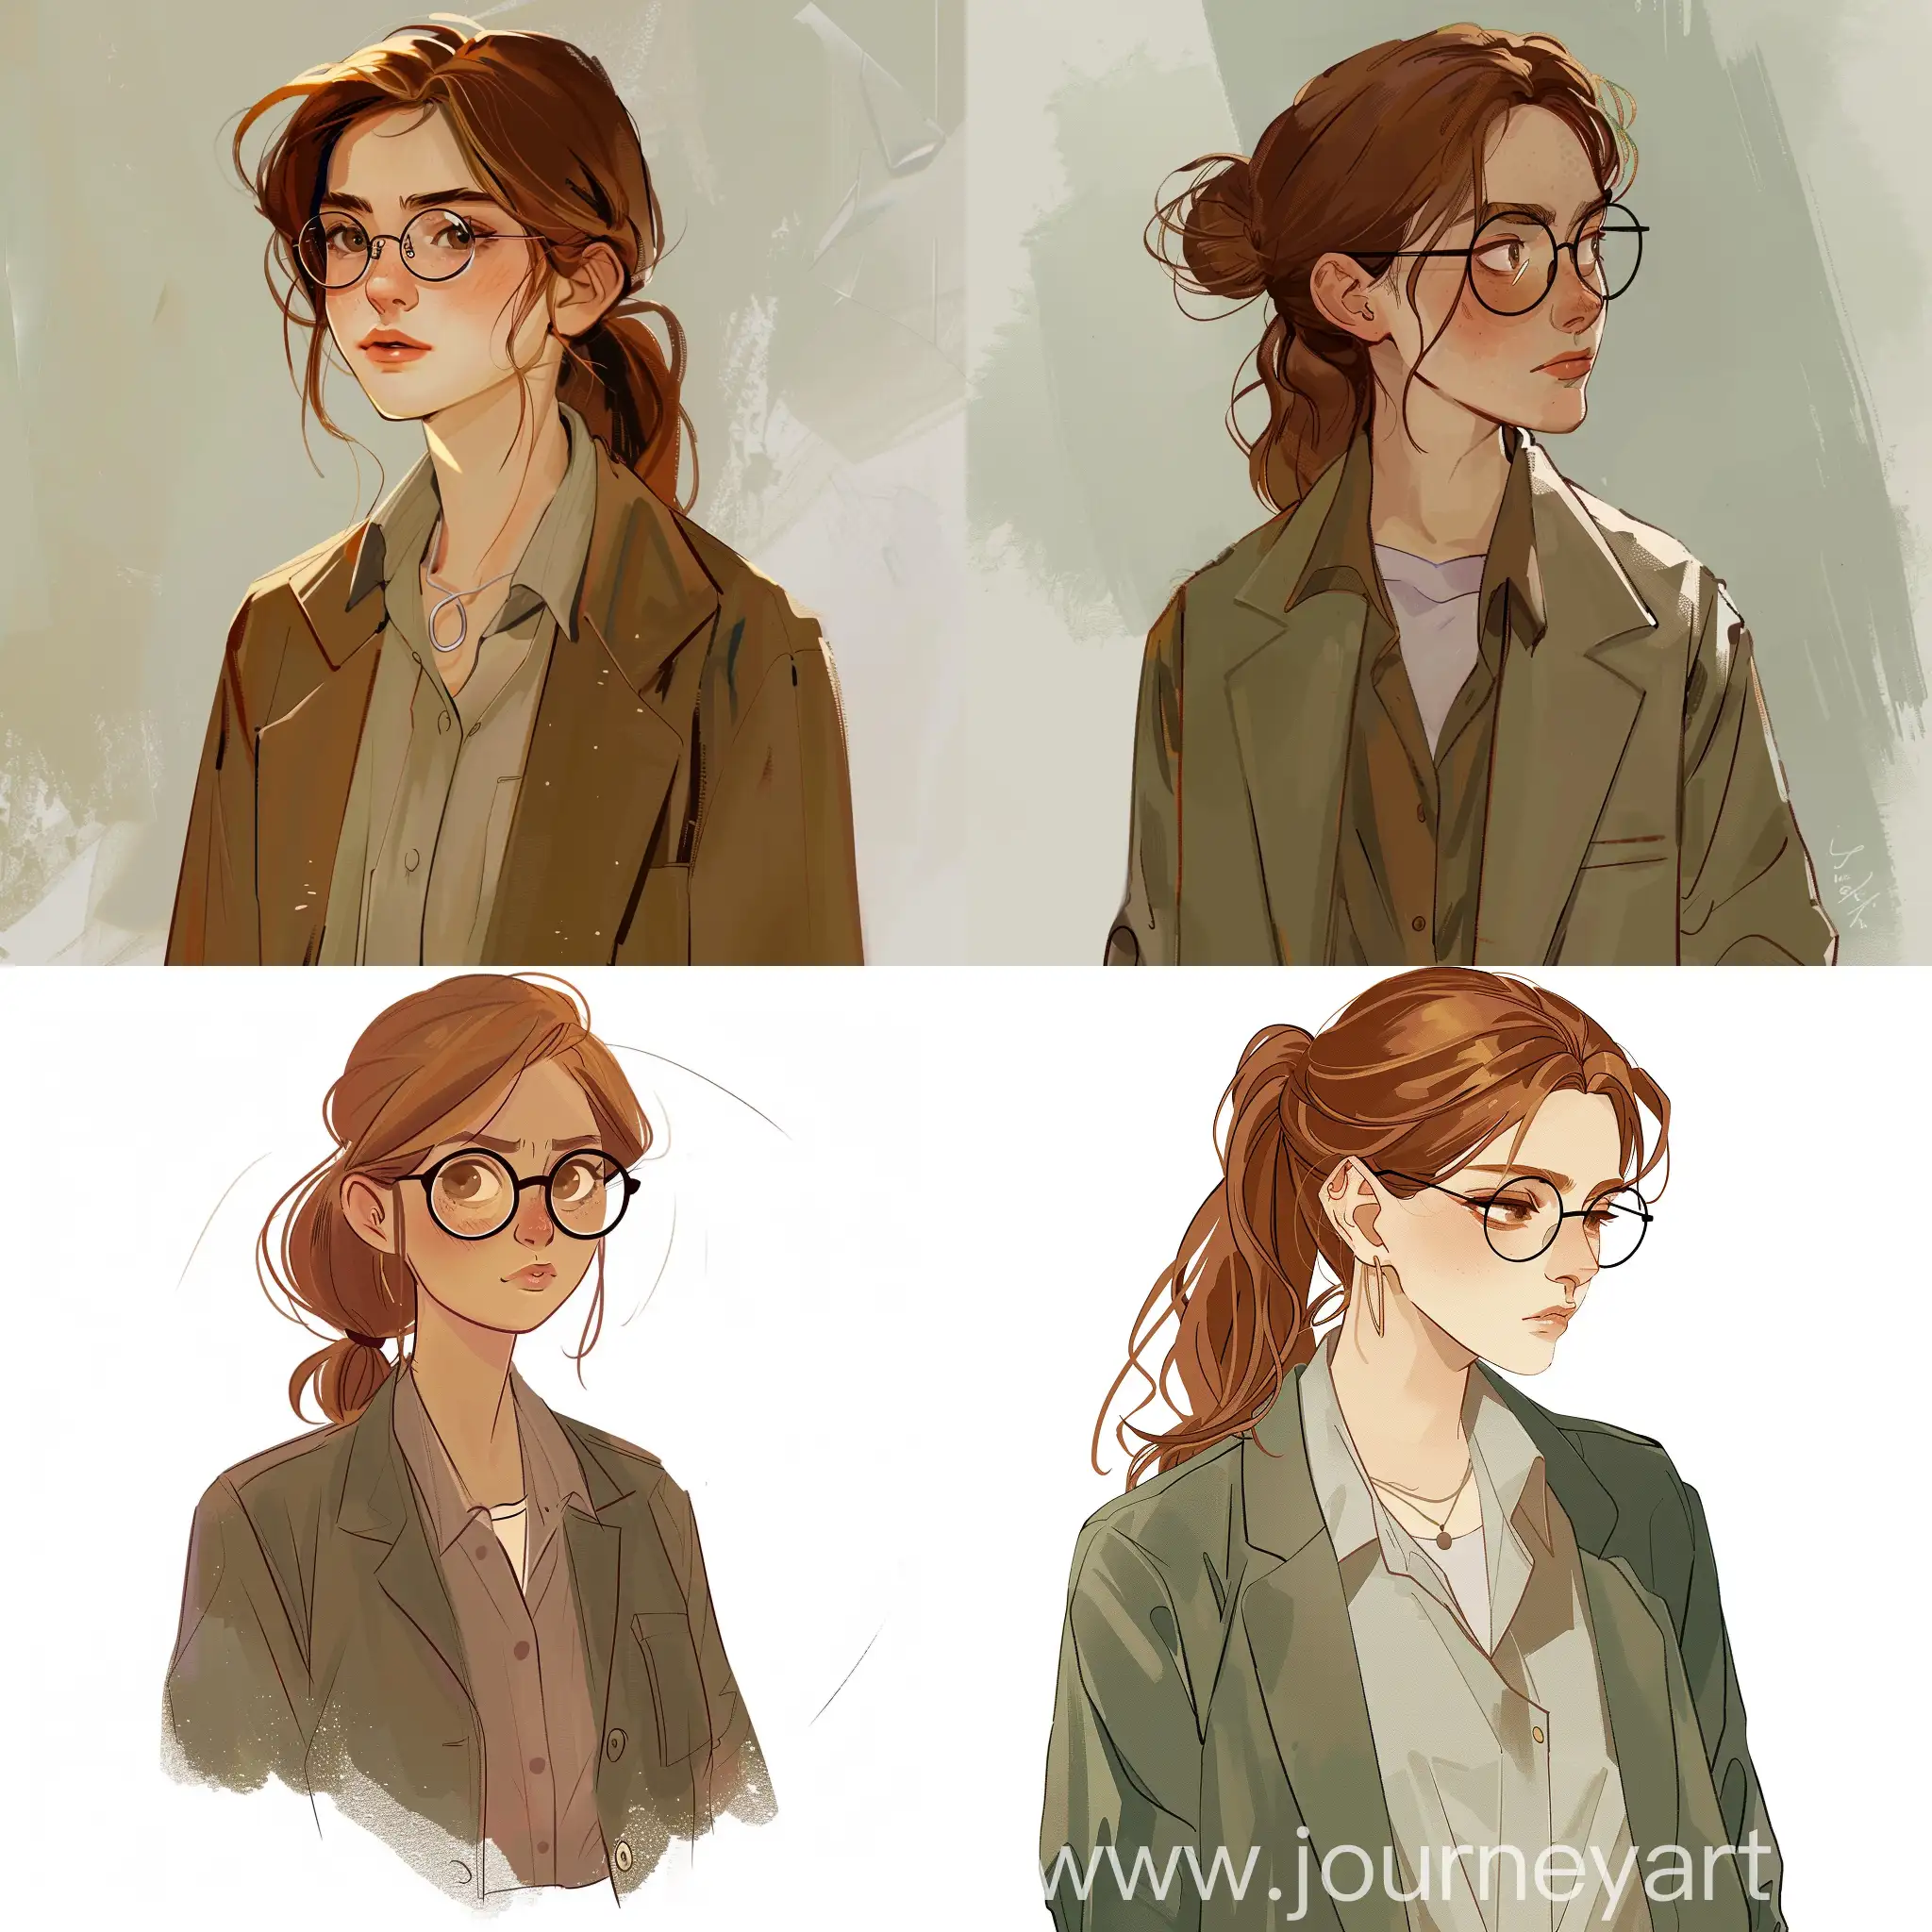 ChestnutHaired-Librarian-in-Glasses-and-IllFitting-Blazer